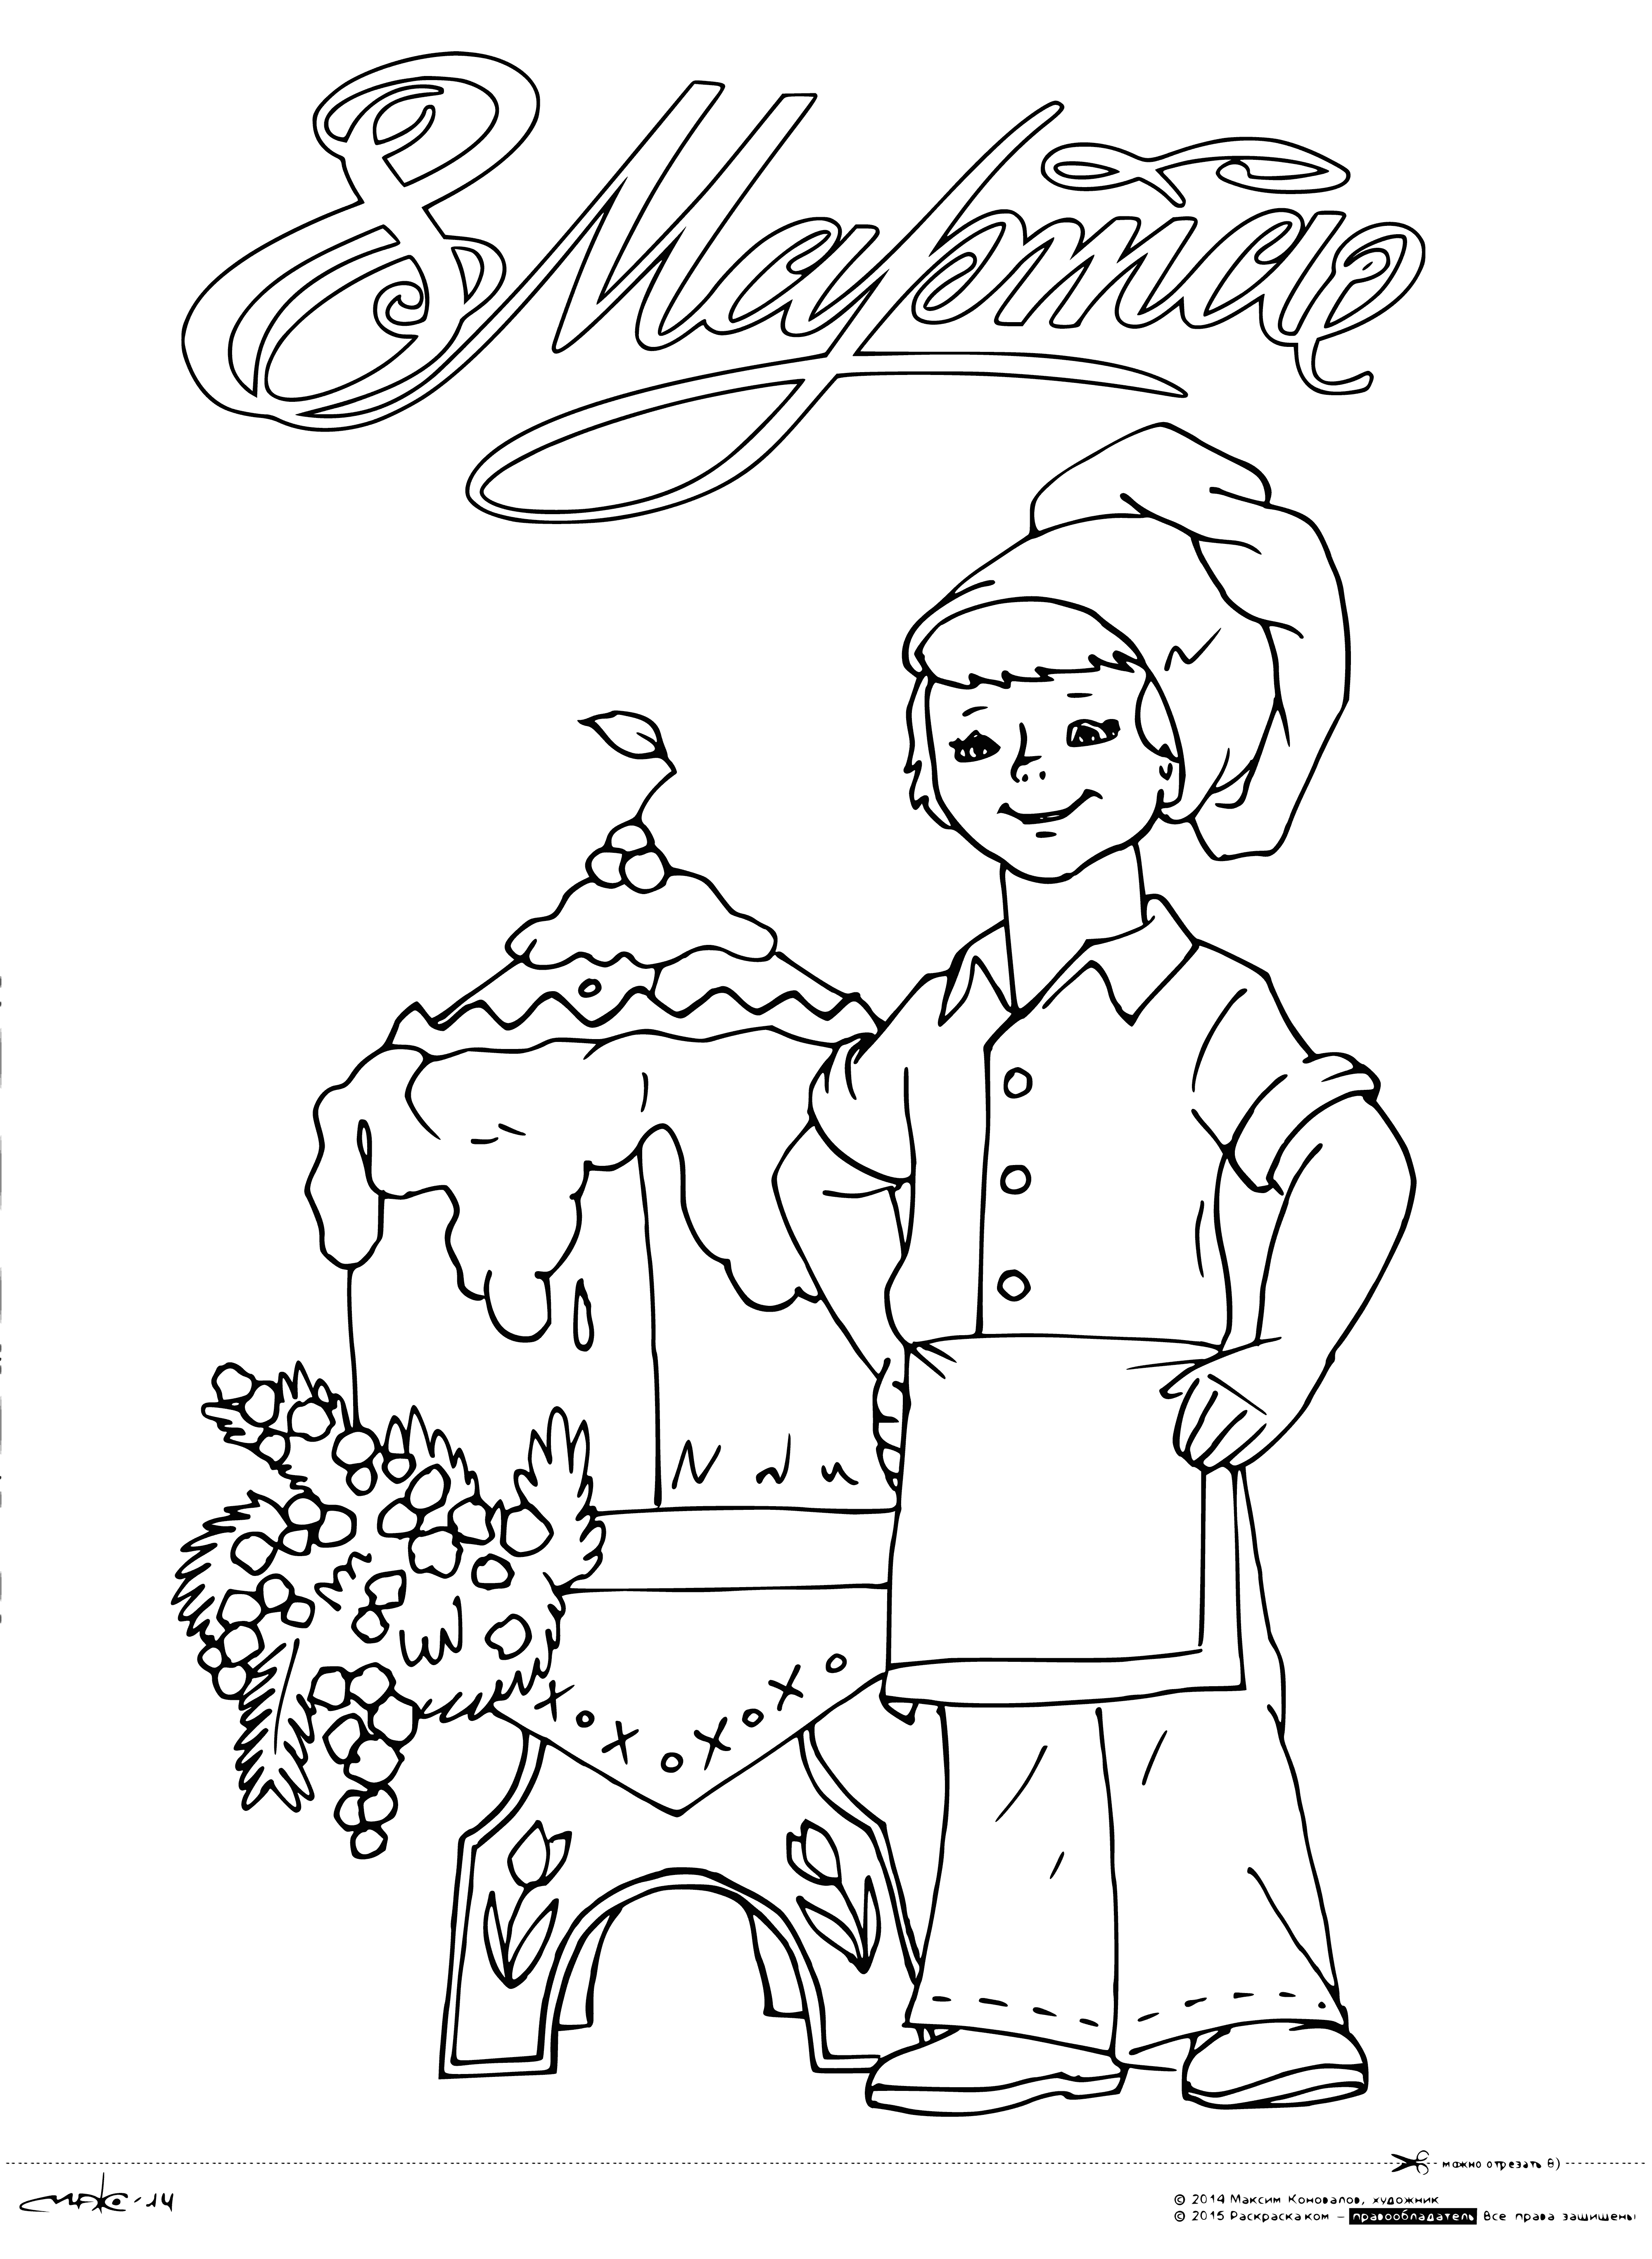 Congratulations to mom on March 8 coloring page